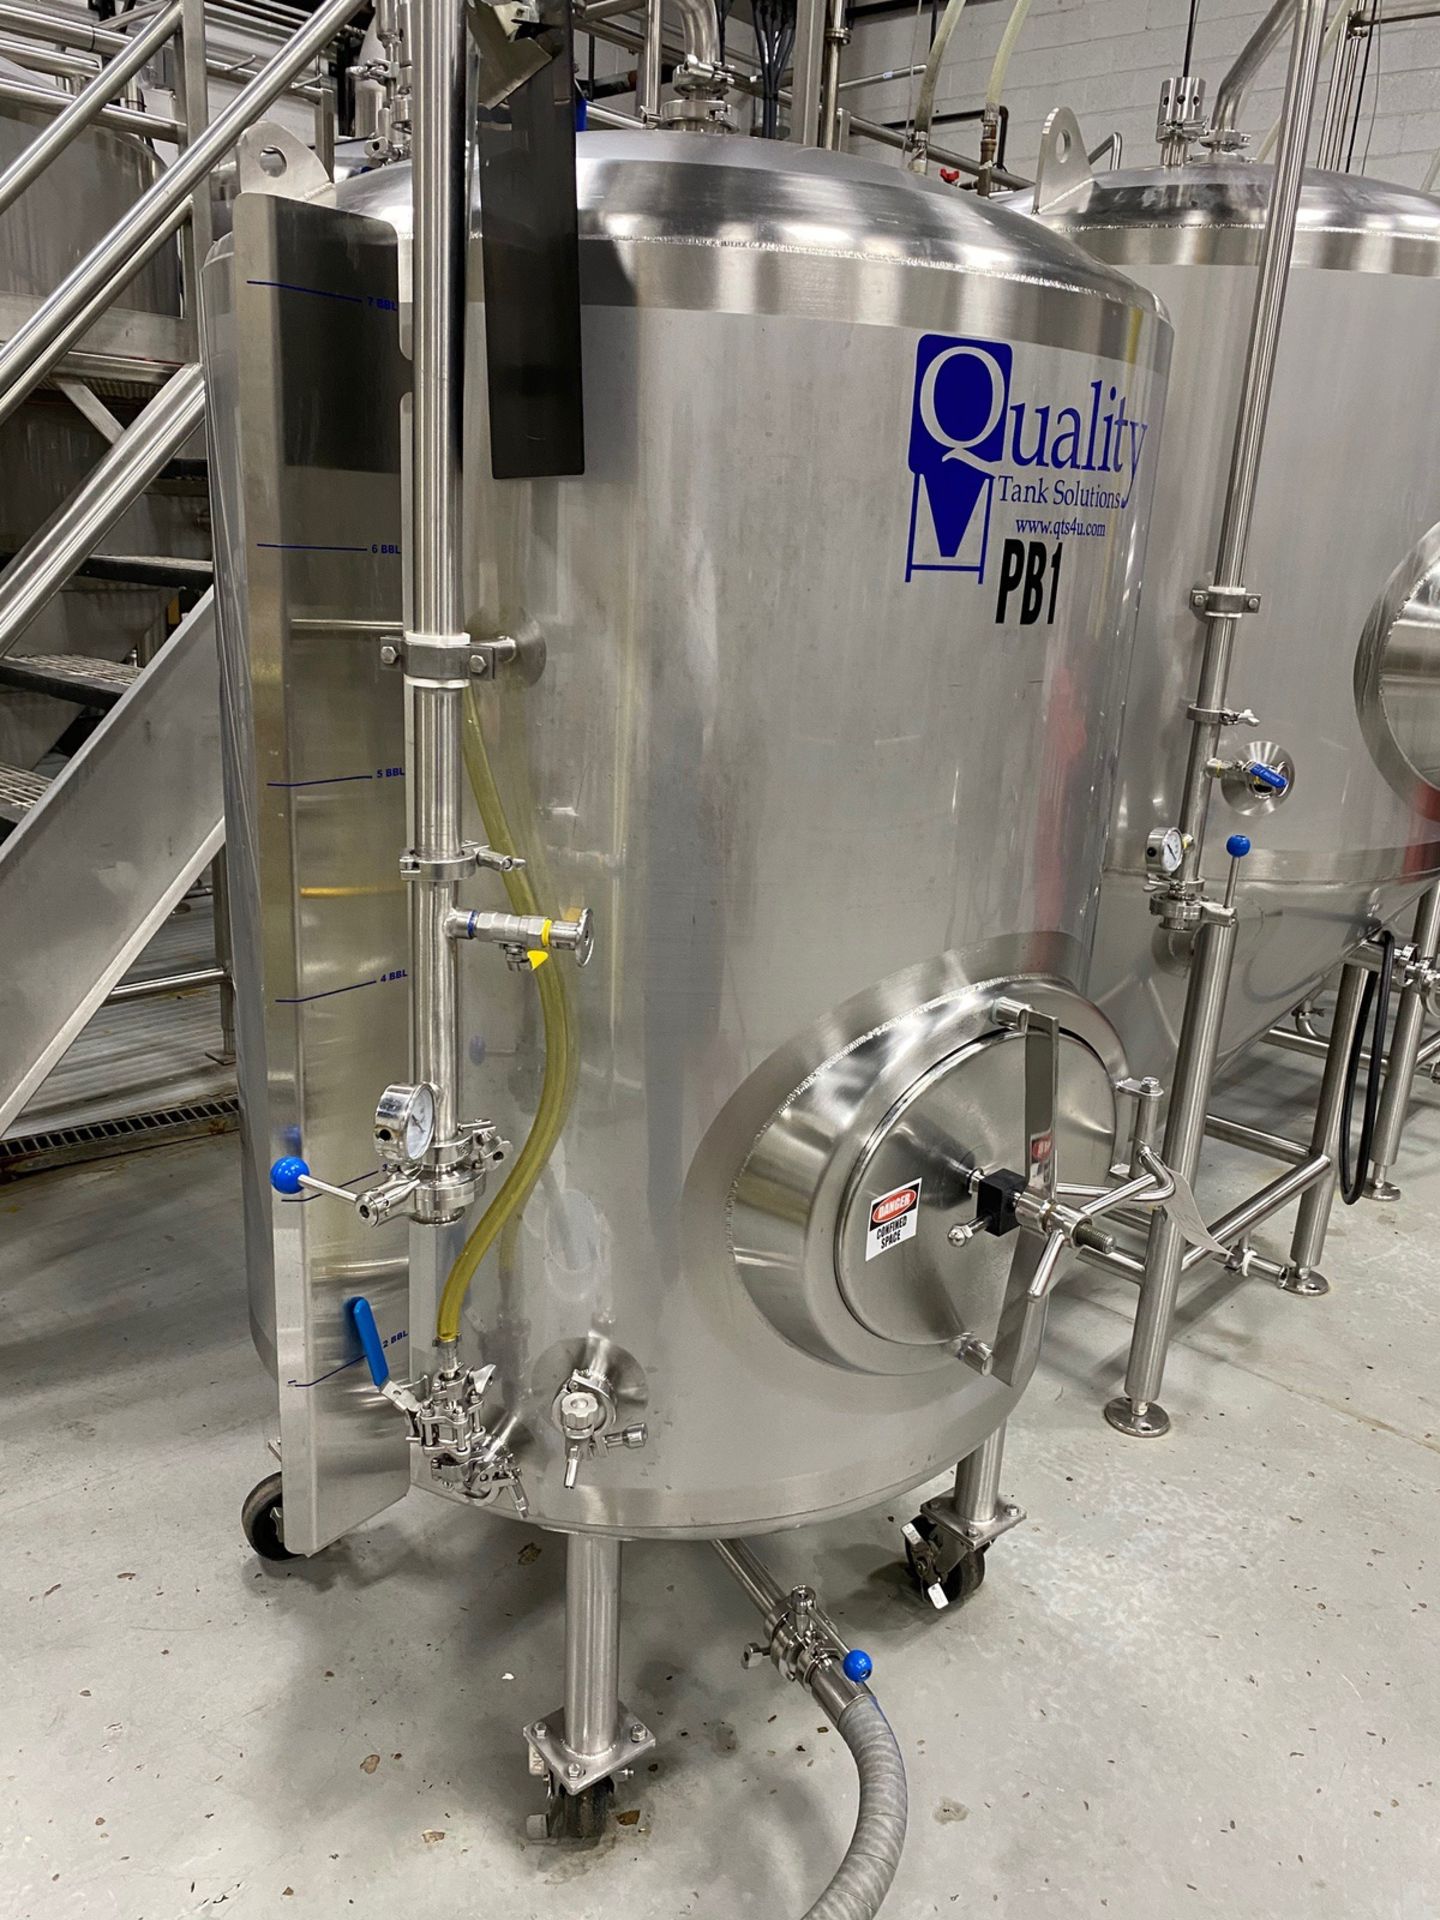 2015 Quality Tank 7 BBL Brite Tank, Glycol Jacketed, On Casters, - Subj to Bulks | Rig Fee: $350 - Image 4 of 6